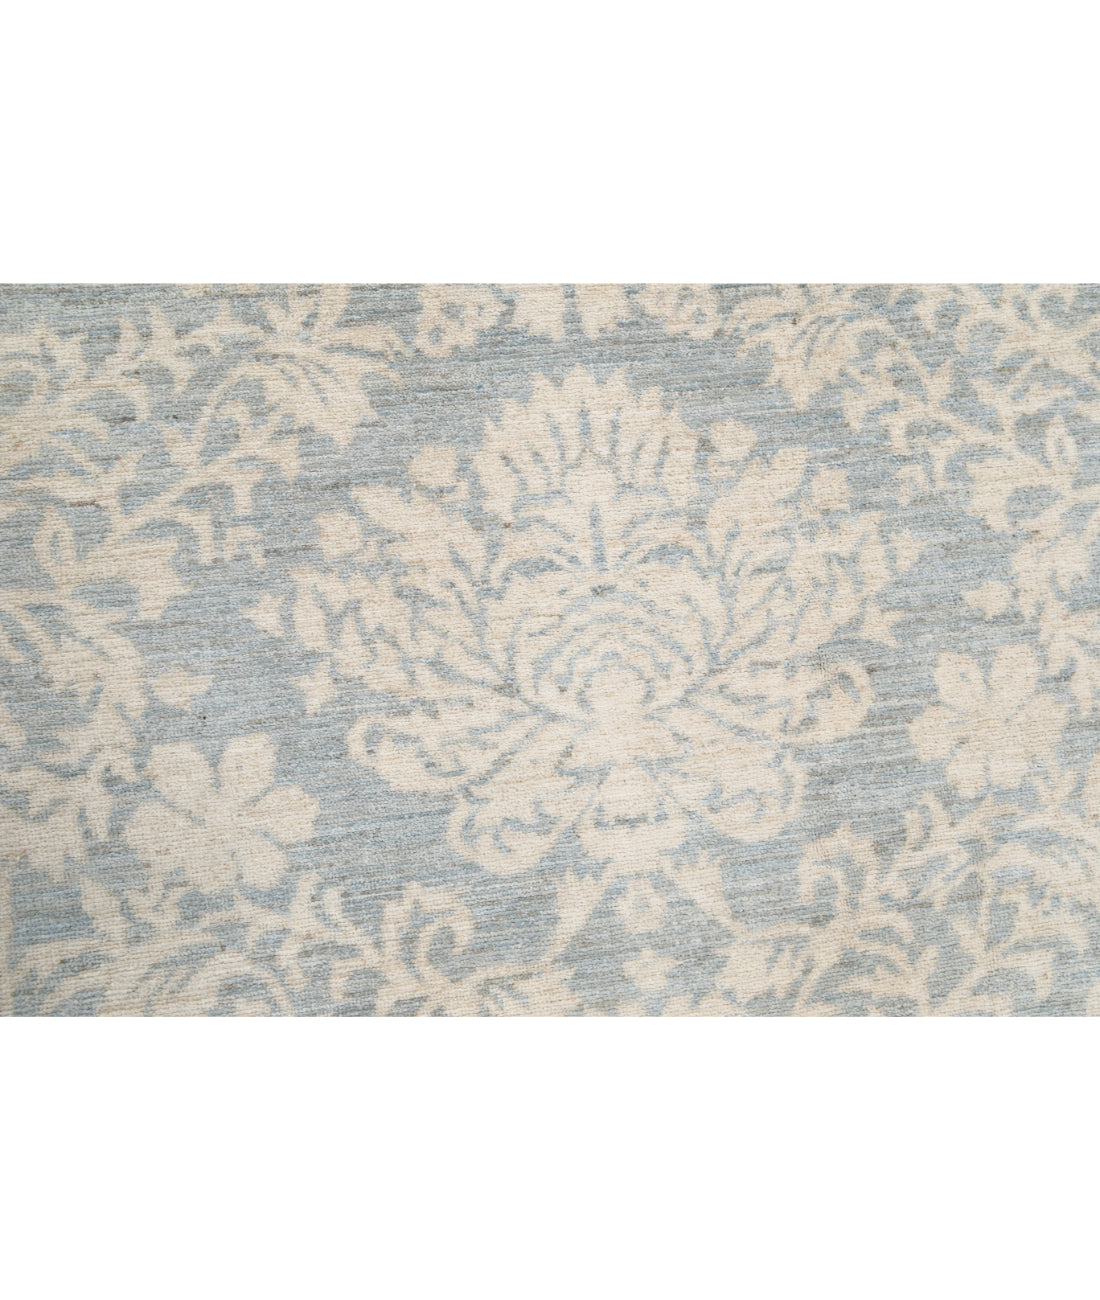 Hand Knotted Artemix Wool Rug - 10'2'' x 13'2'' 10'2'' x 13'2'' (305 X 395) / Grey / Ivory